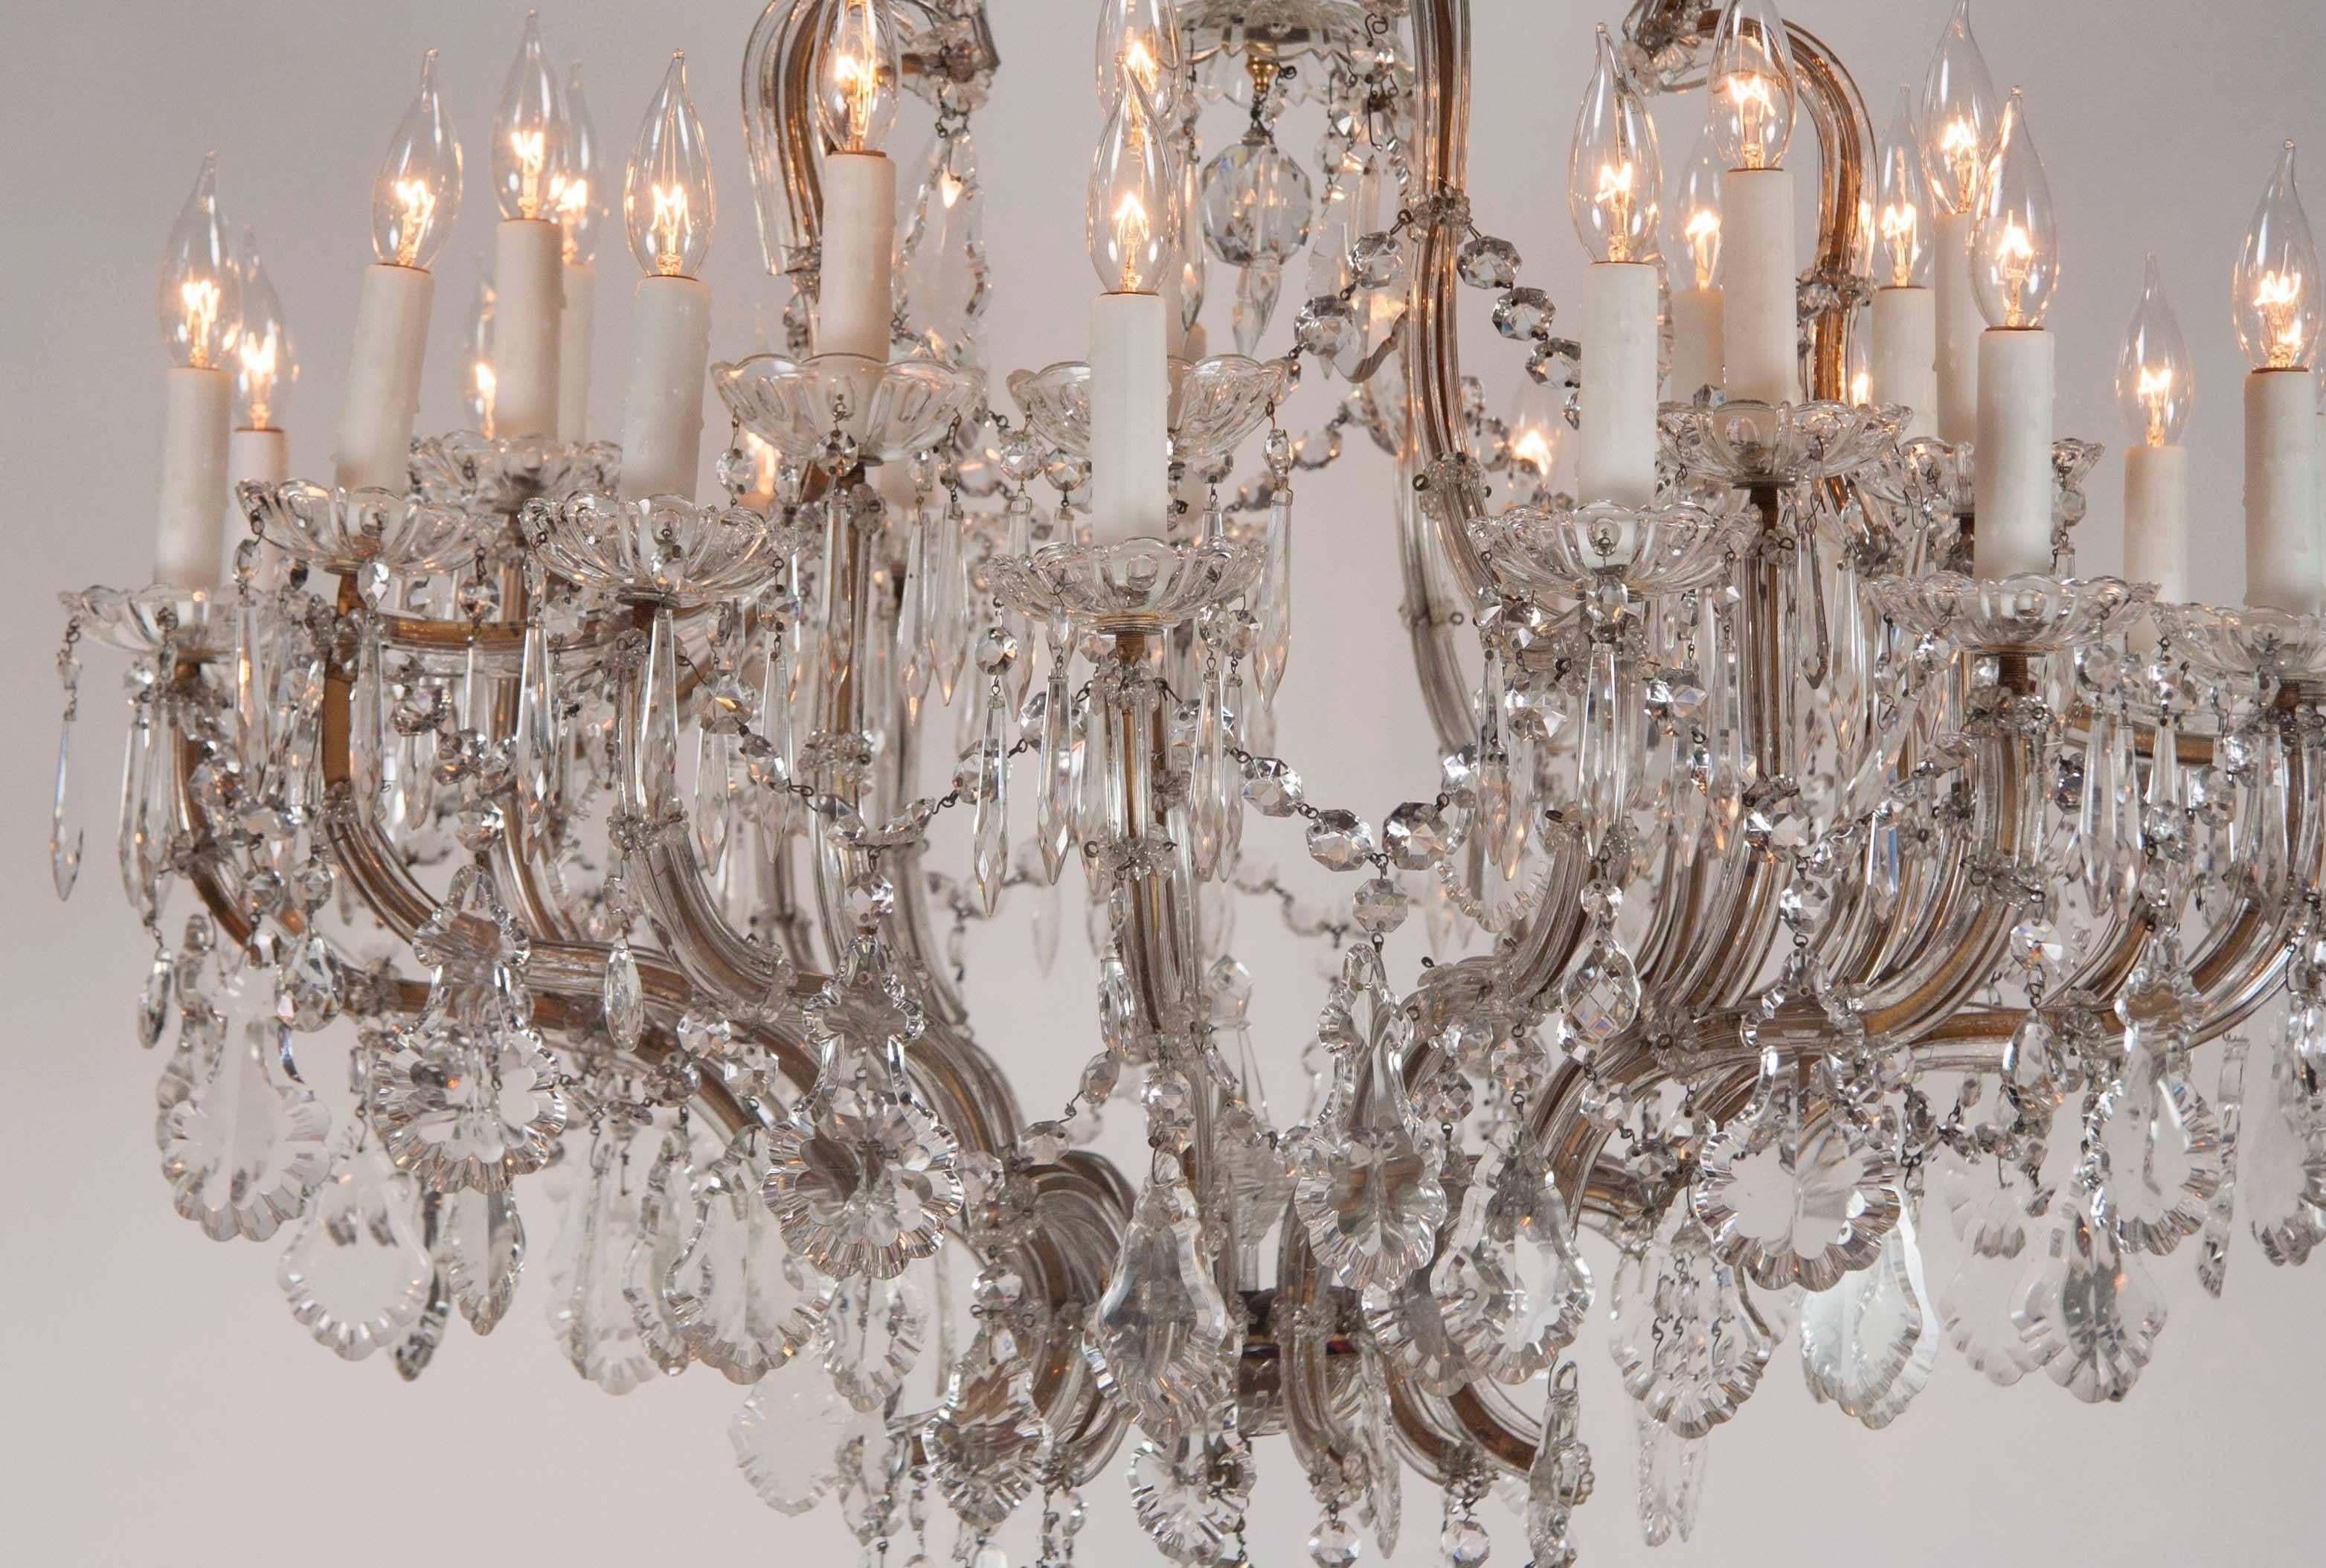 An early 20th century French crystal chandelier having 25 lights.